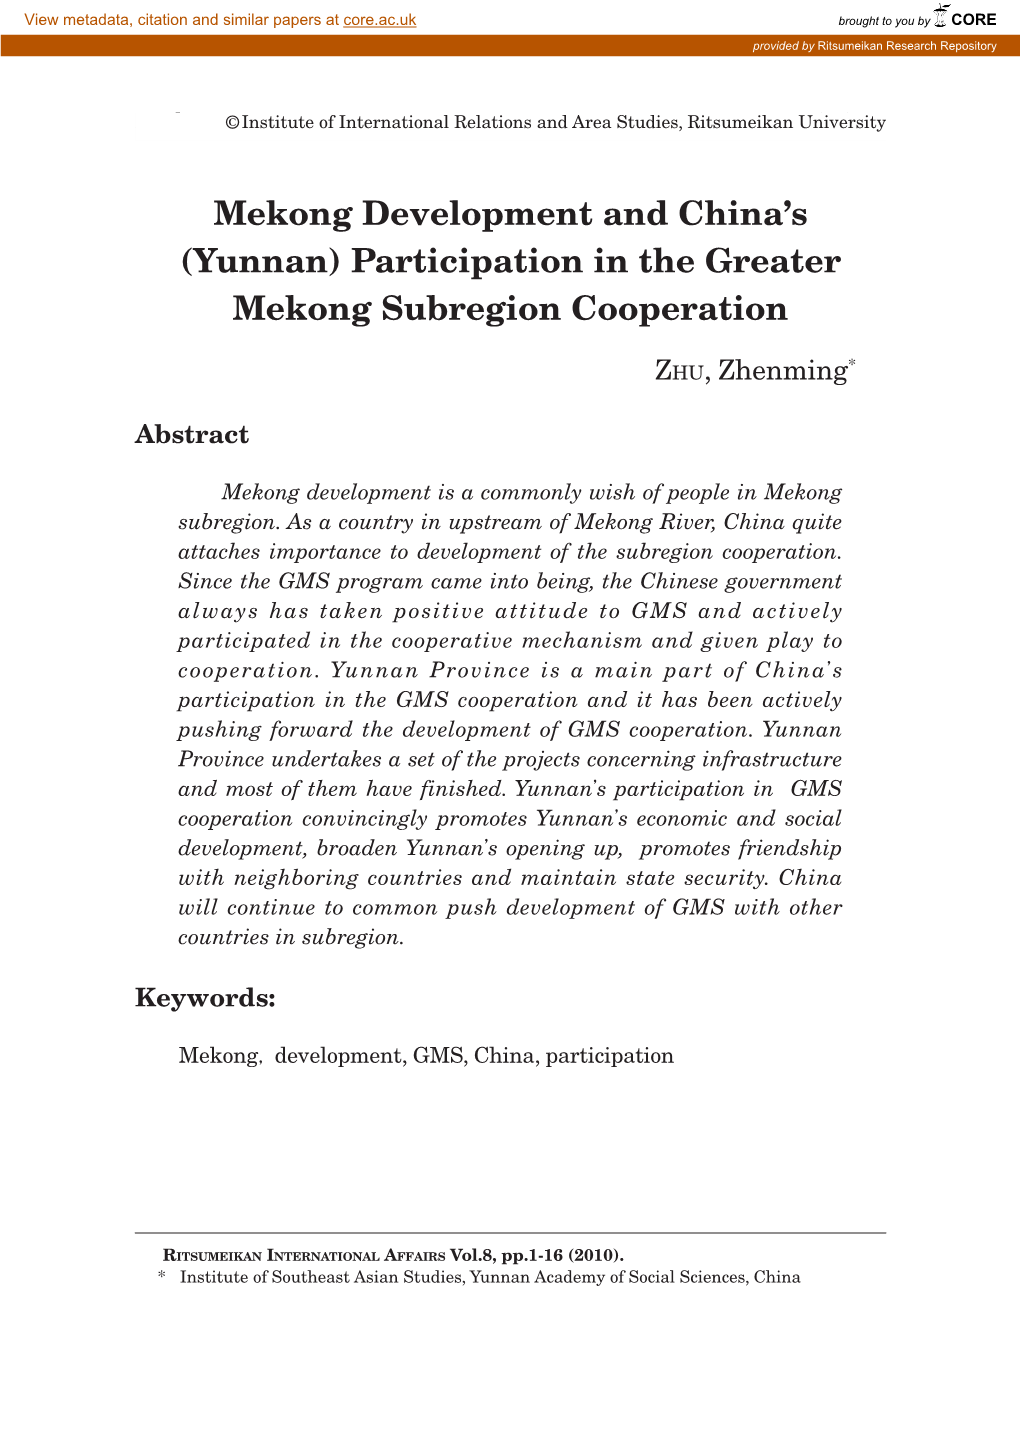 (Yunnan) Participation in the Greater Mekong Subregion Cooperation